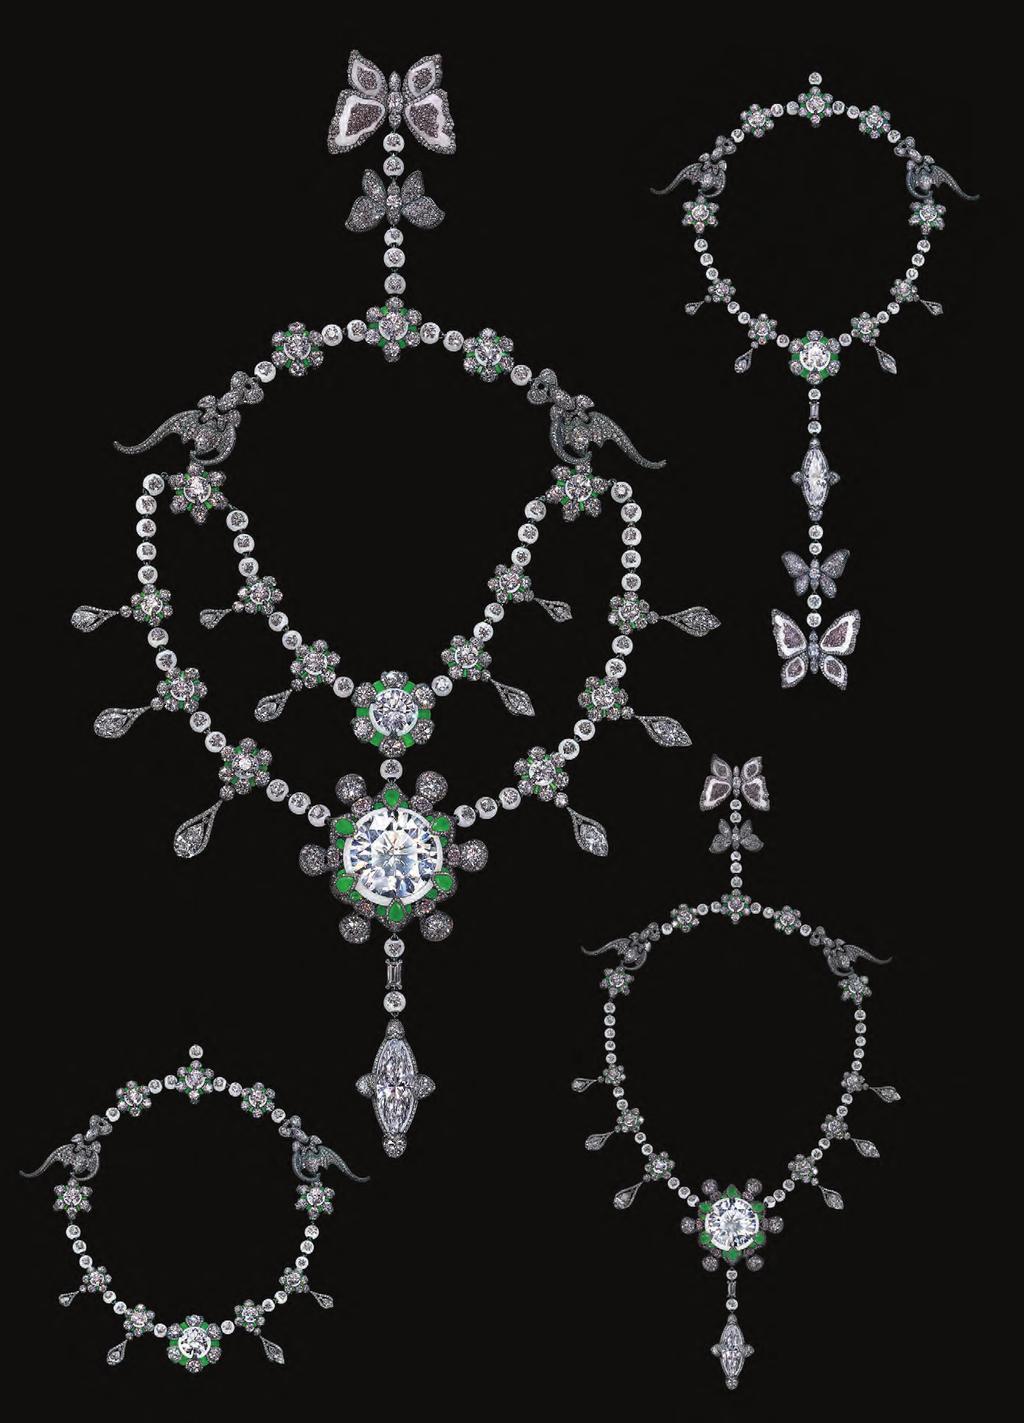 Spotlight Created by Wallace Chan, worldrenowned jewellery artist, the uniquely modular masterpiece A Heritage in Bloom can be worn in